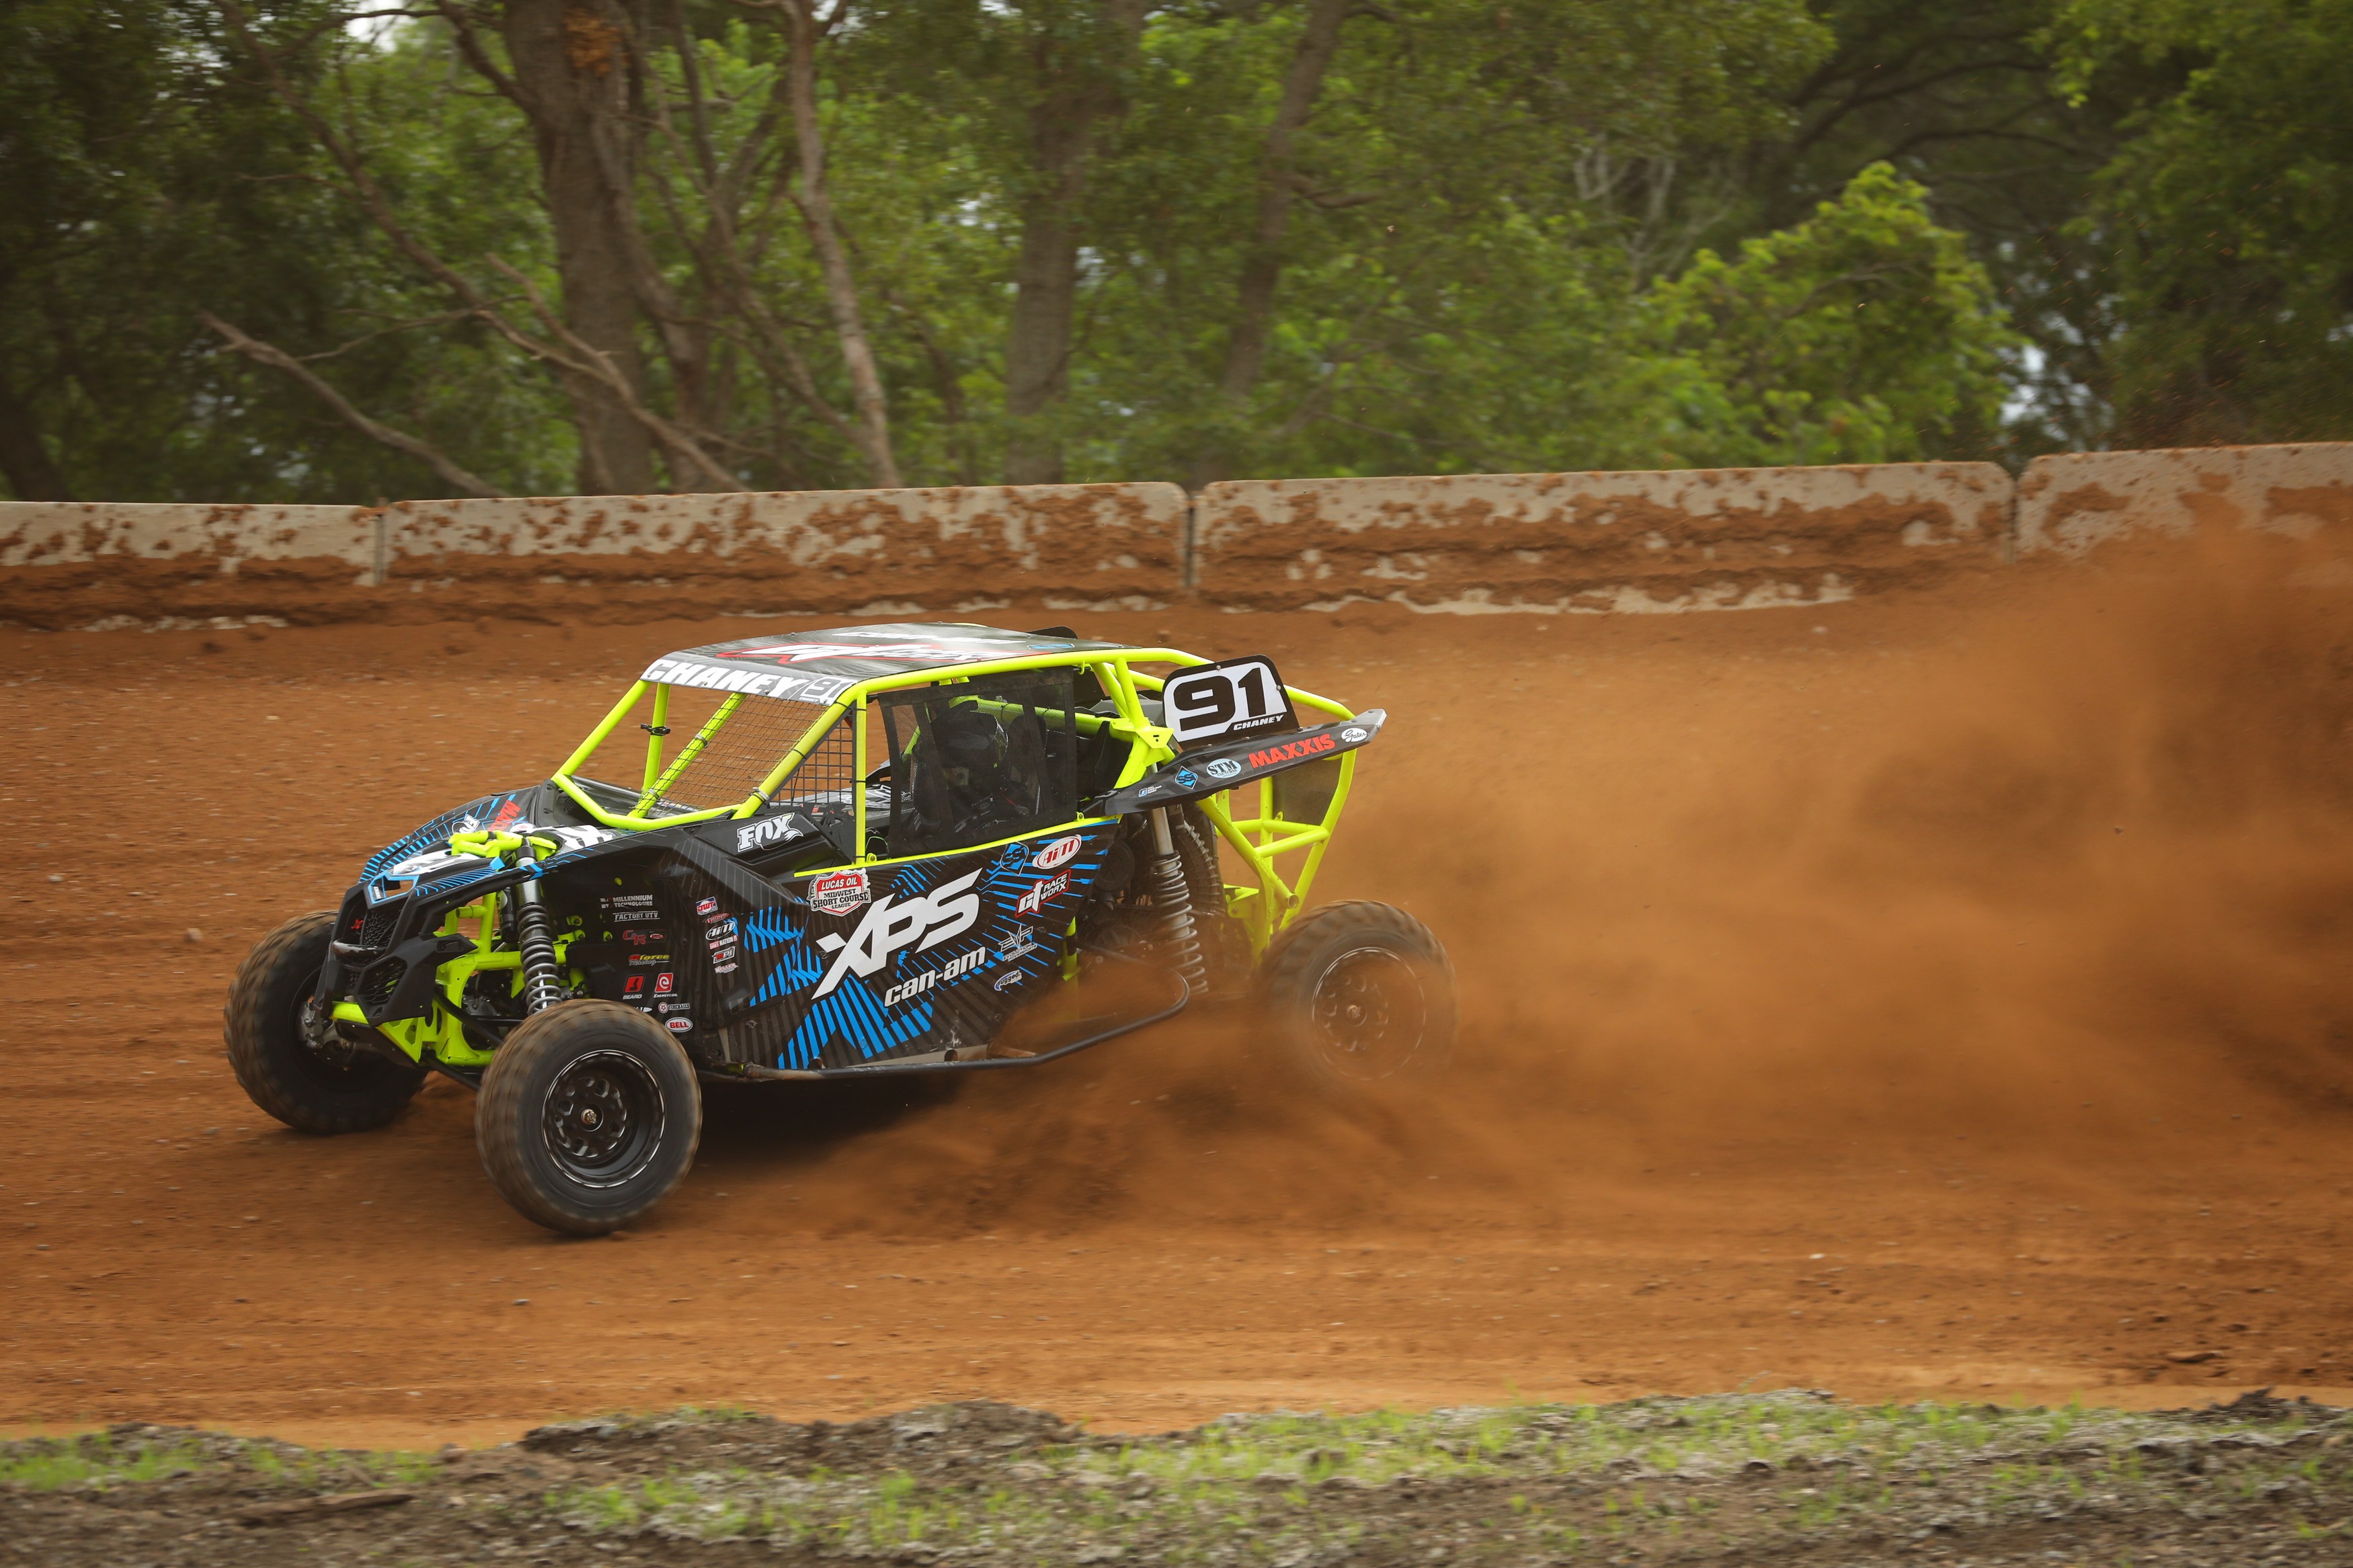 Kyle Chaney drifting in the dirt